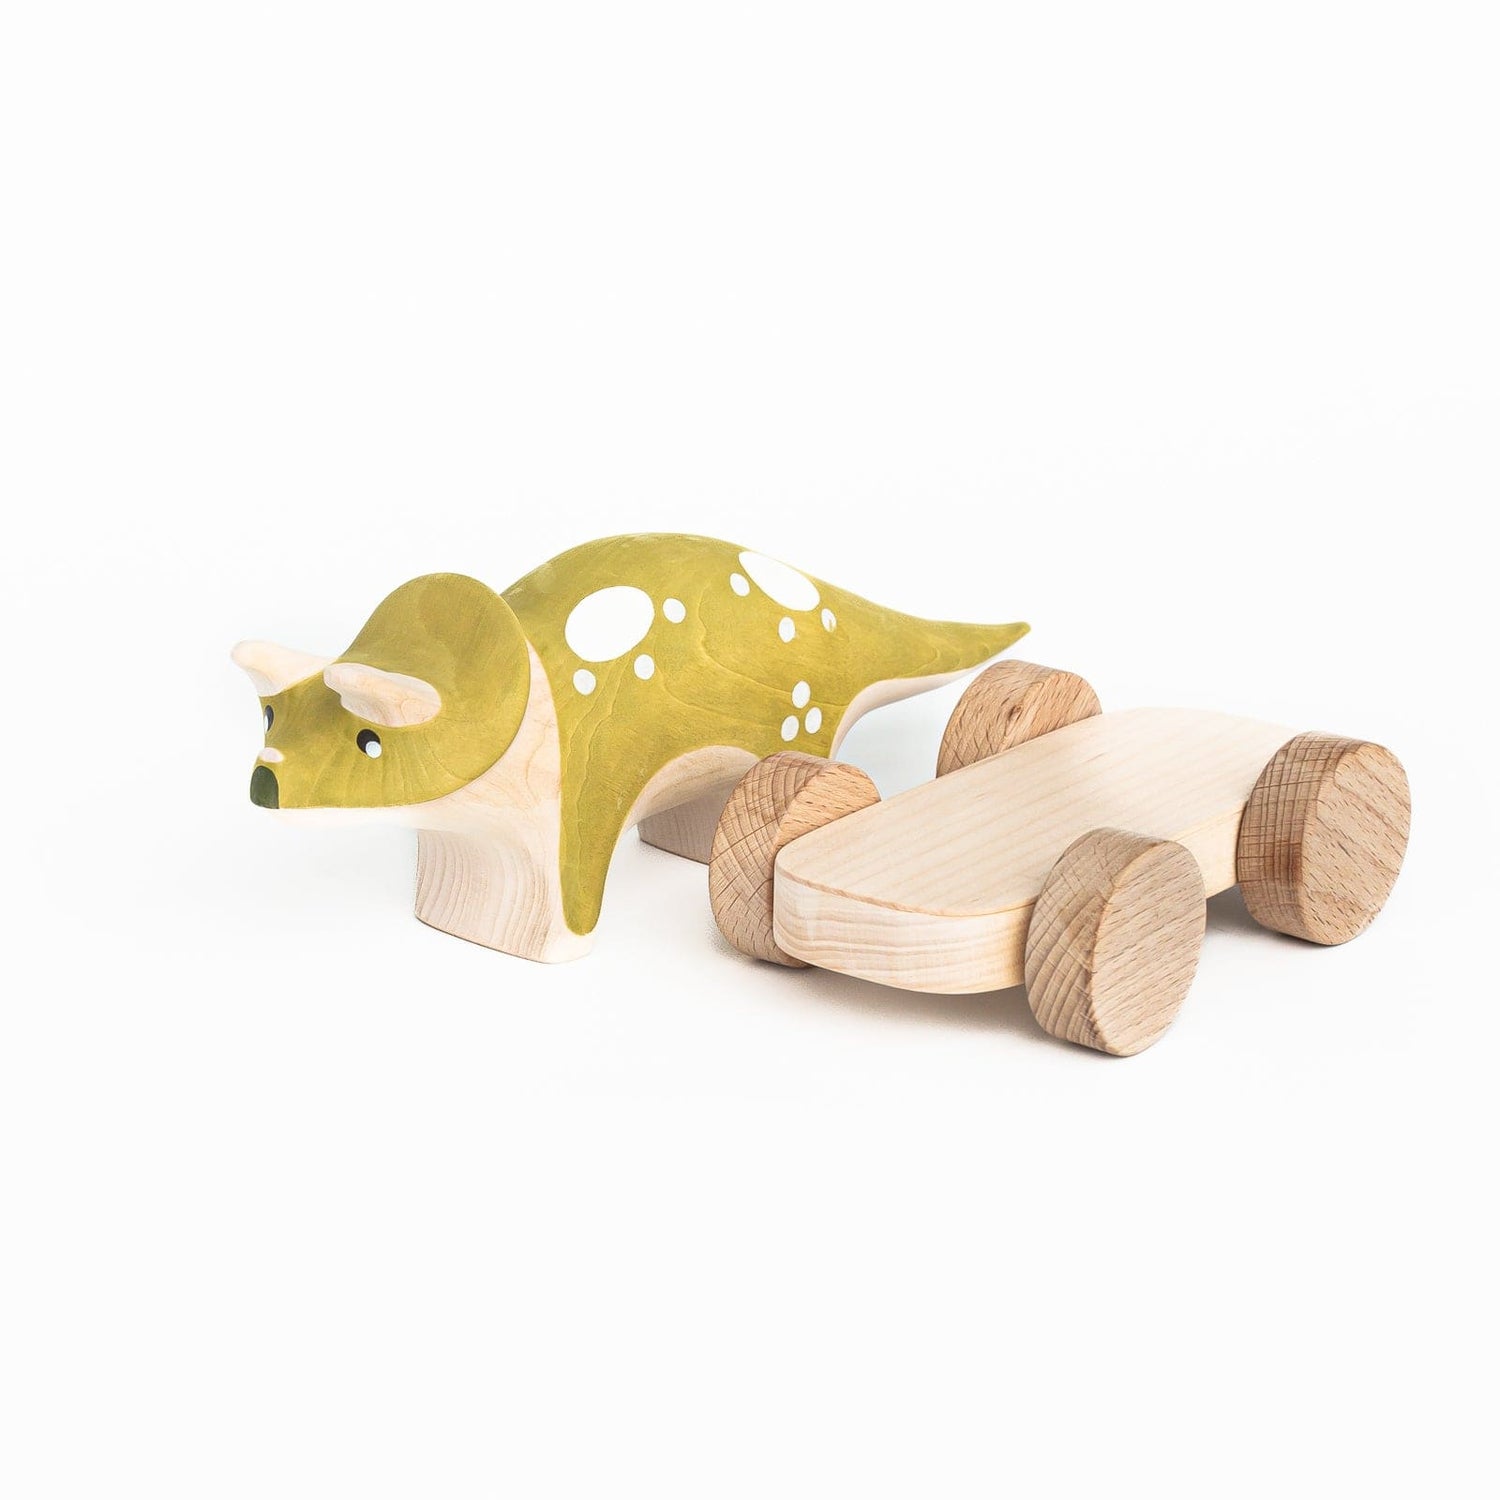 Triceratops Toy